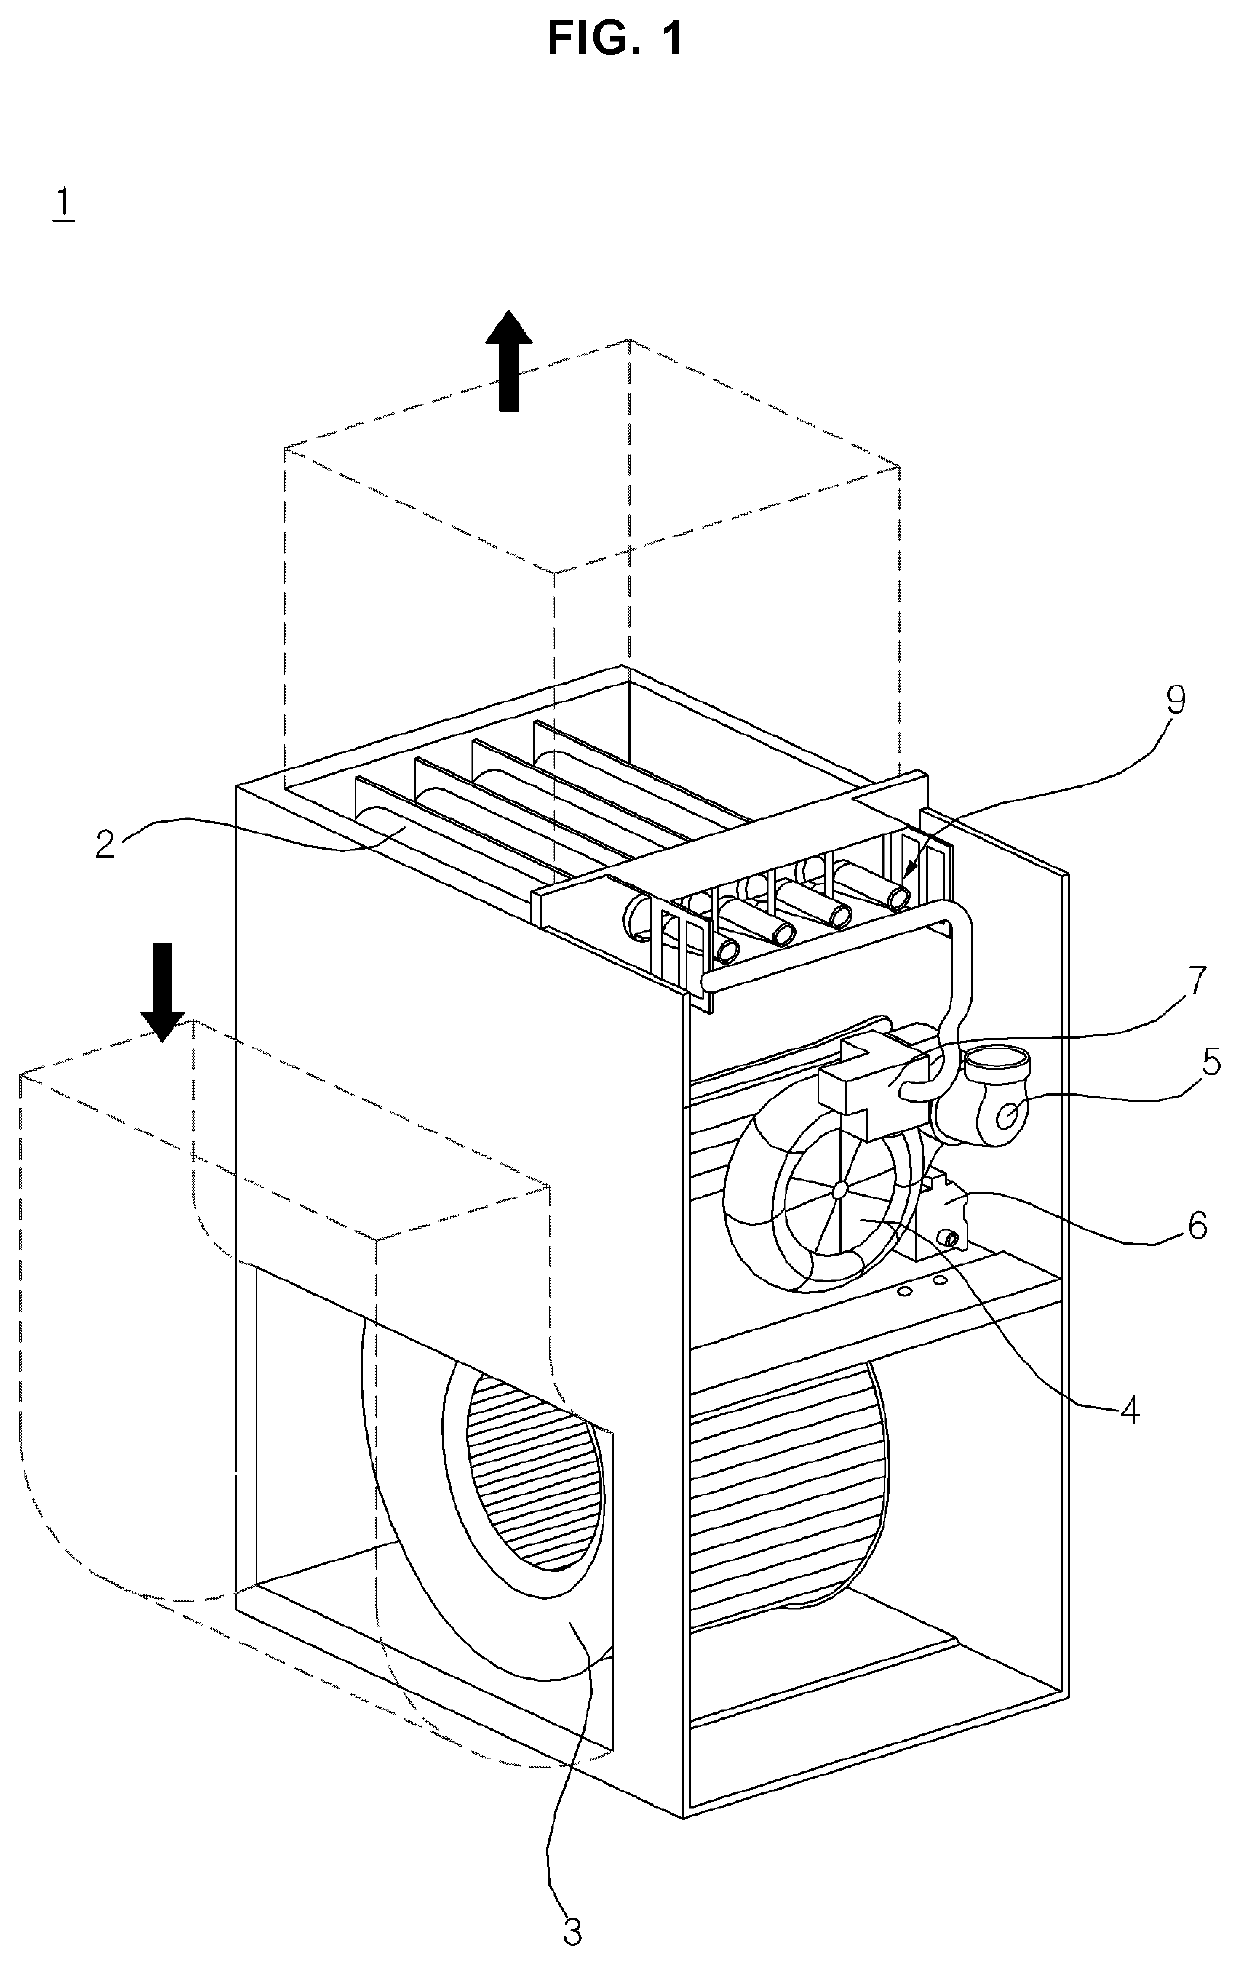 Rpm control method of blower for gas furnace